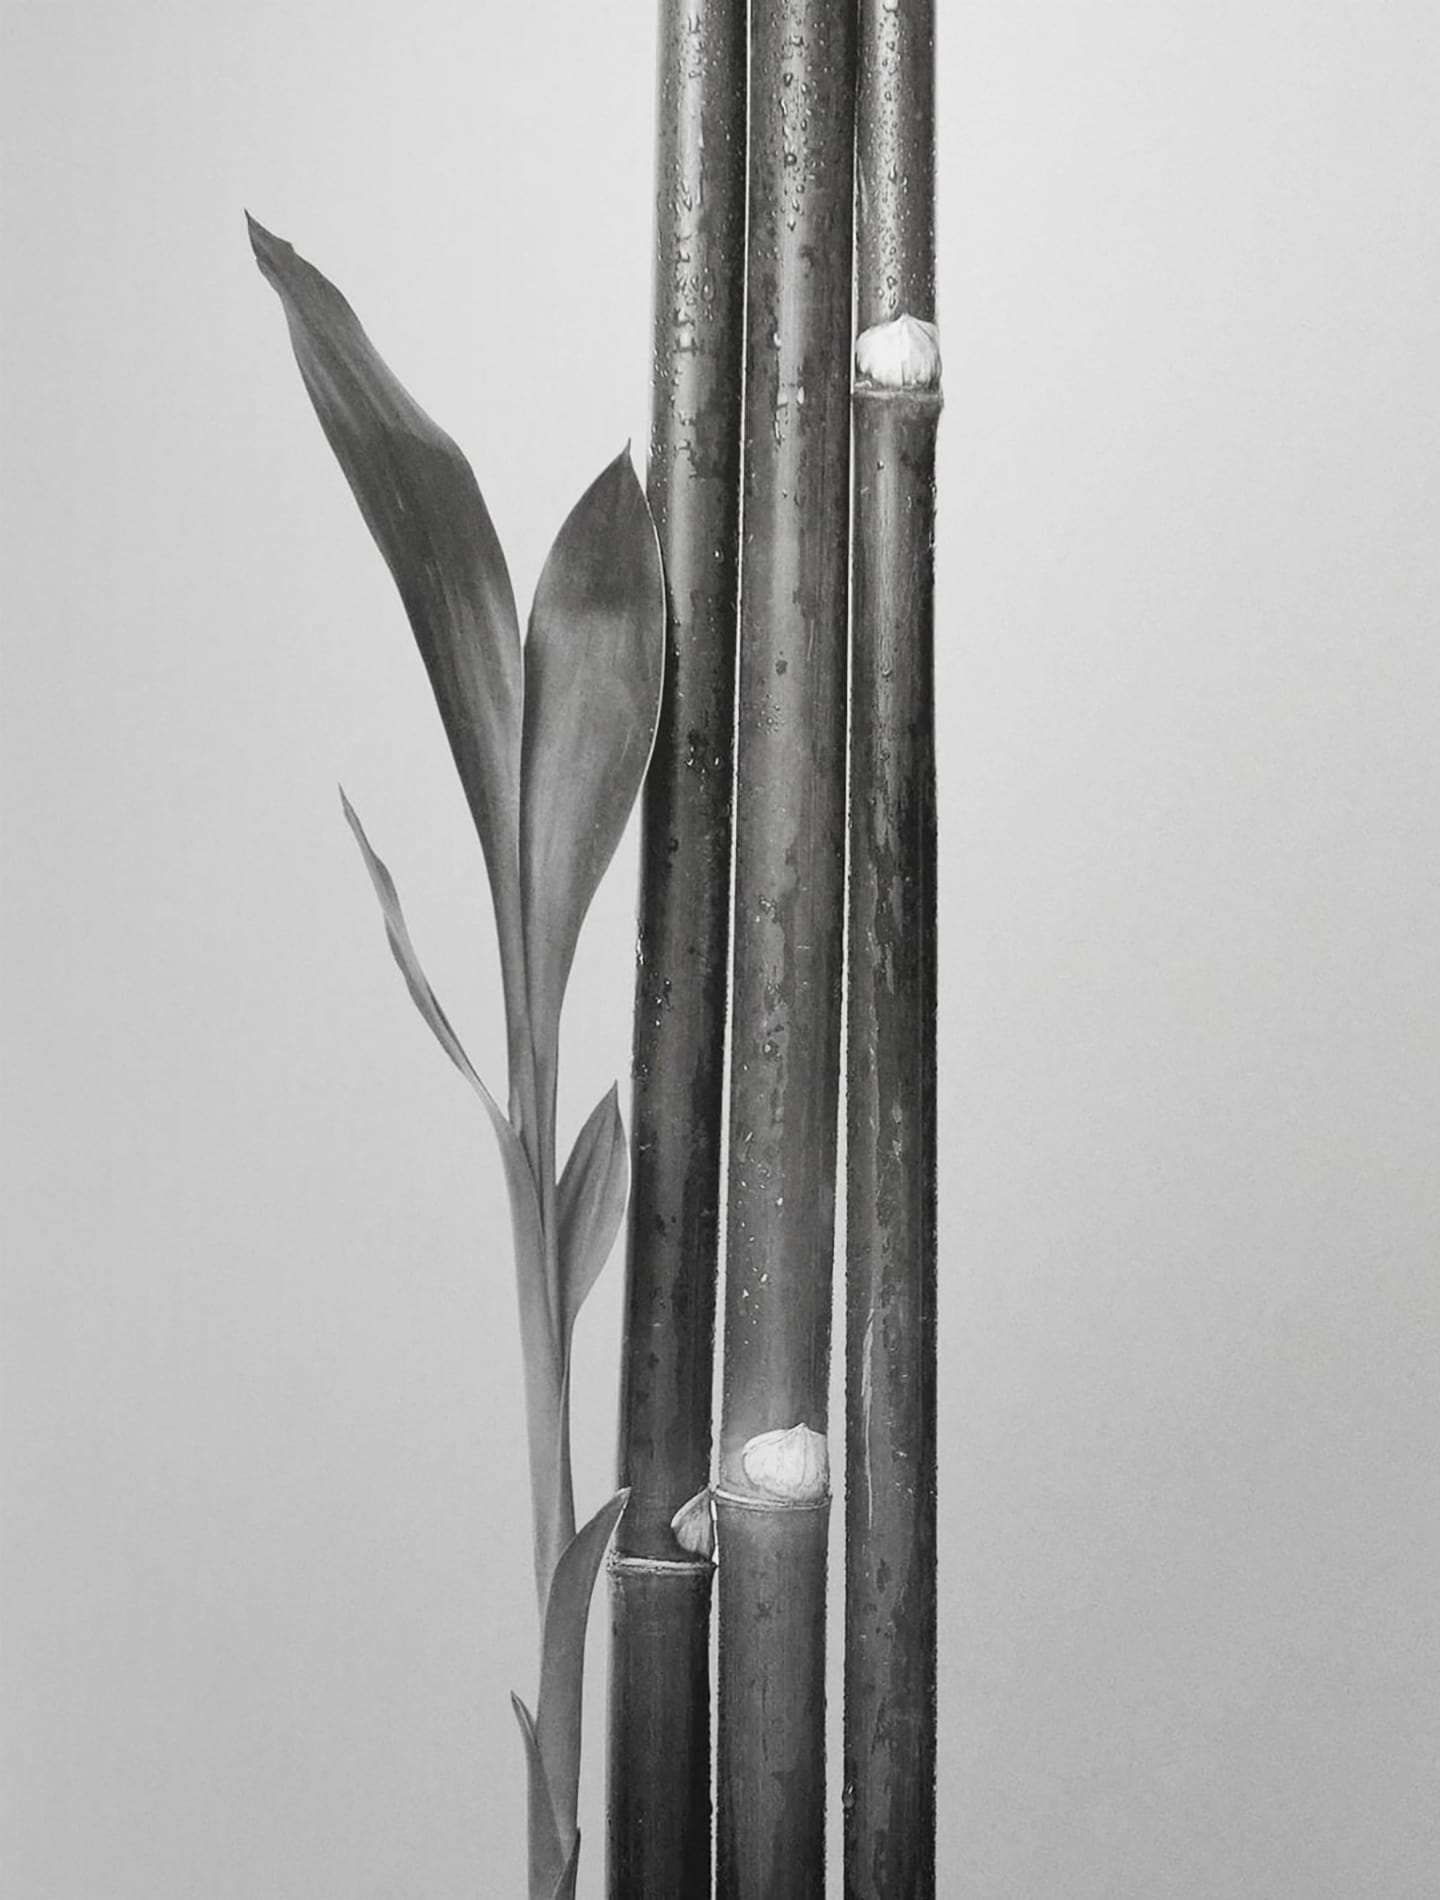 Bamboo stalks and leaf (black and white)